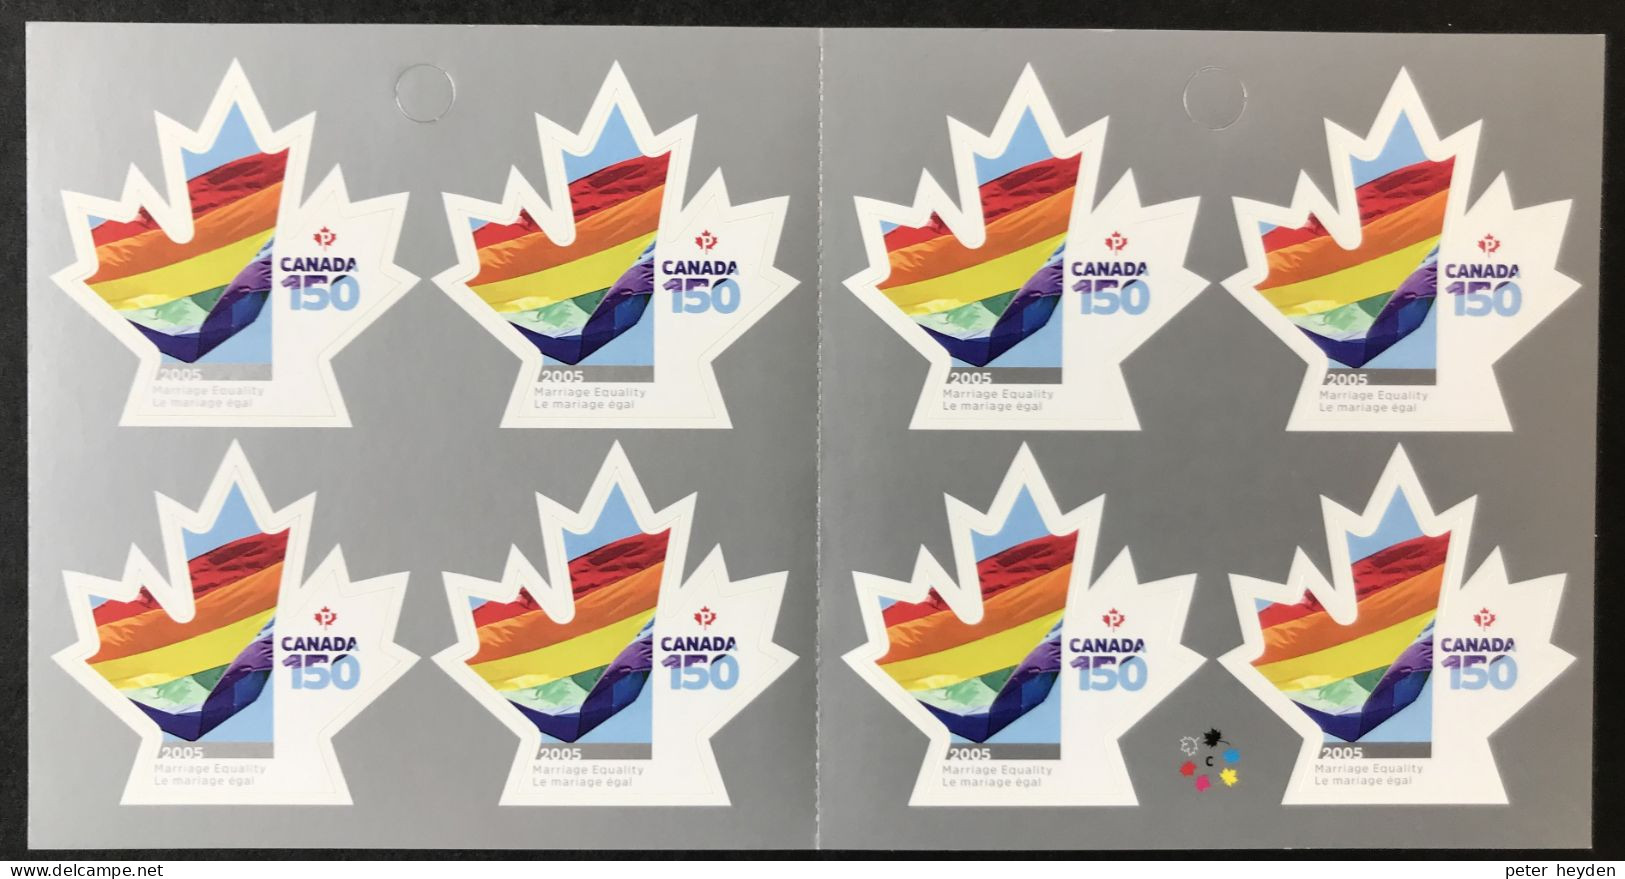 CANADA  ~ 2017 Marriage Equality MNH Booklet ~ Rainbow LGBT Gay Lesbian Transgender - Unused Stamps